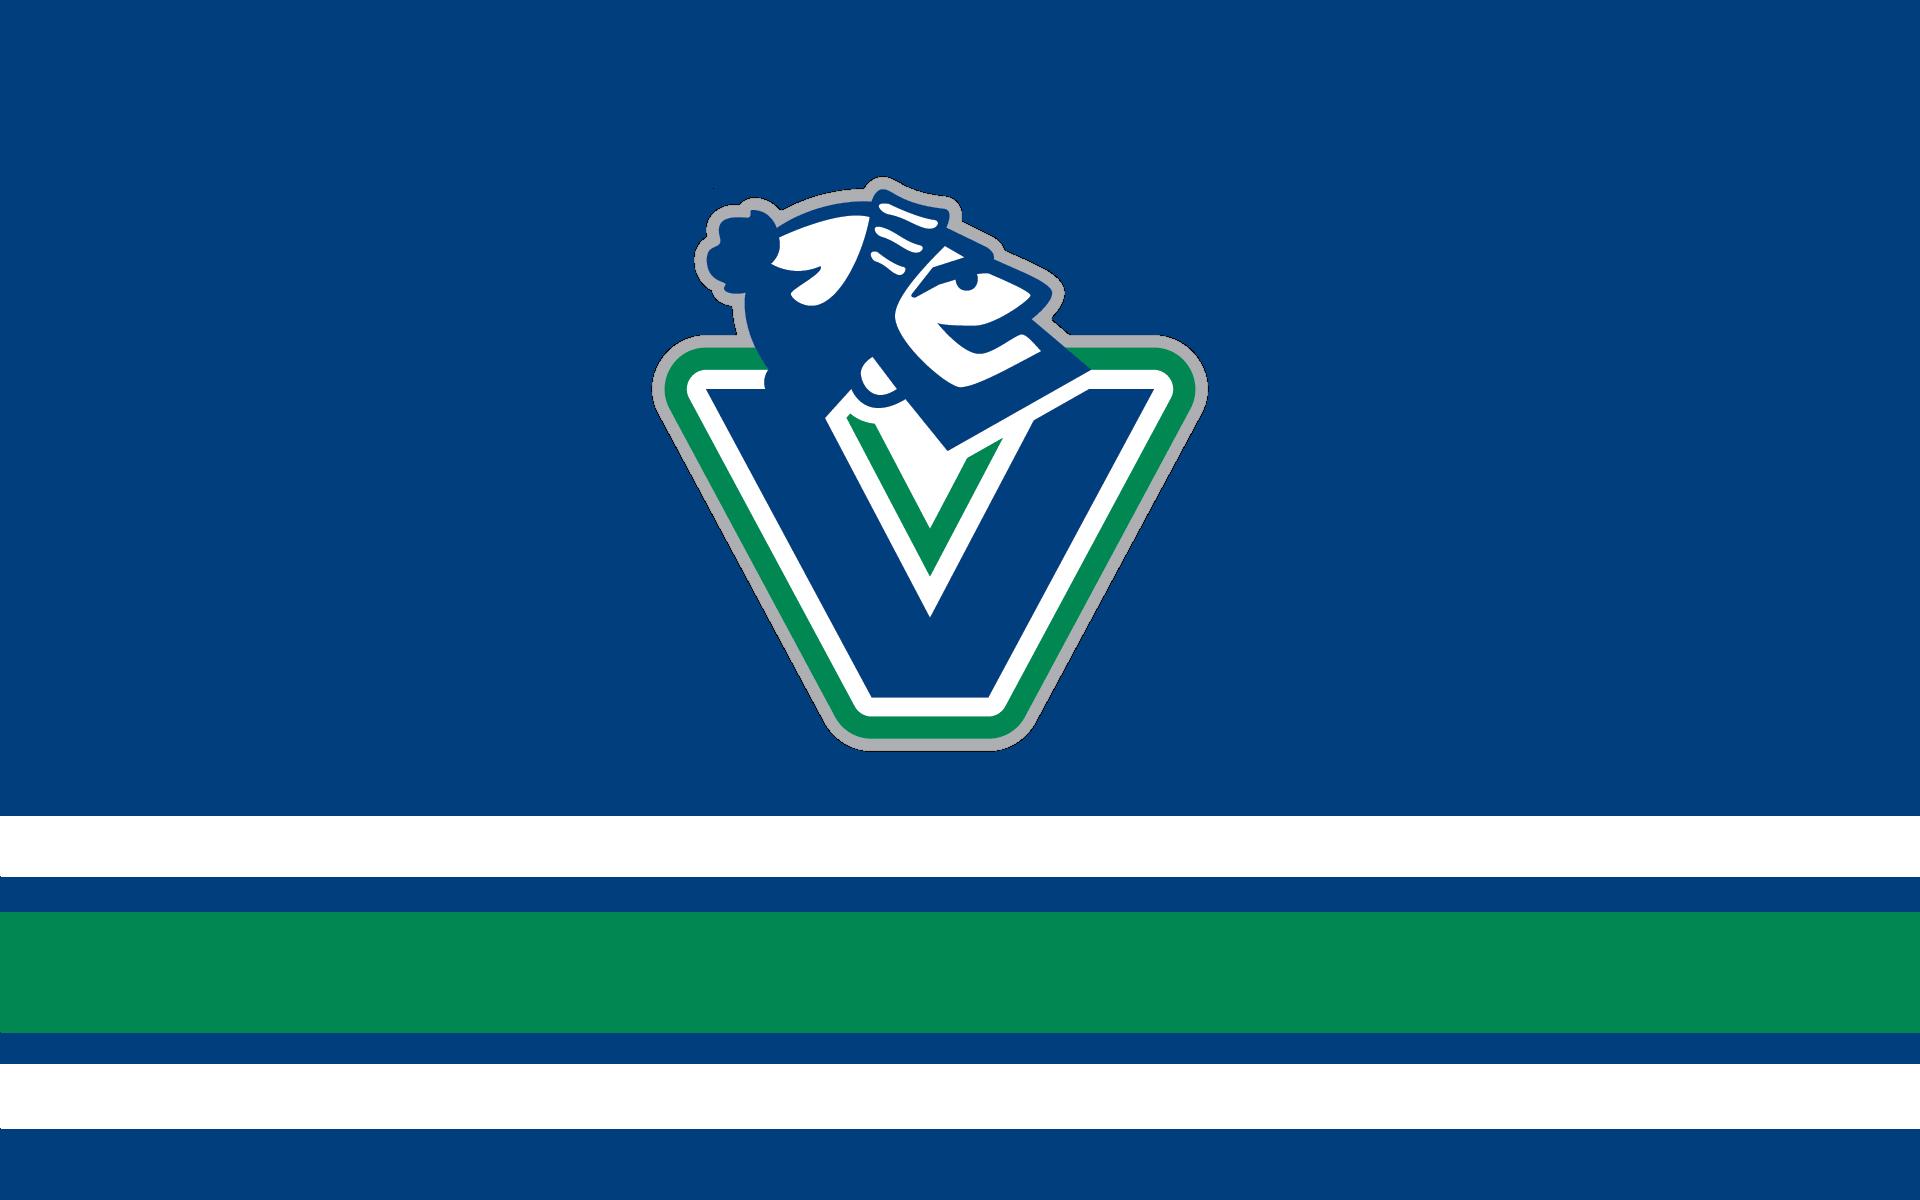 Vancouver &quot;Johnny&quot; Canucks by TomStrong